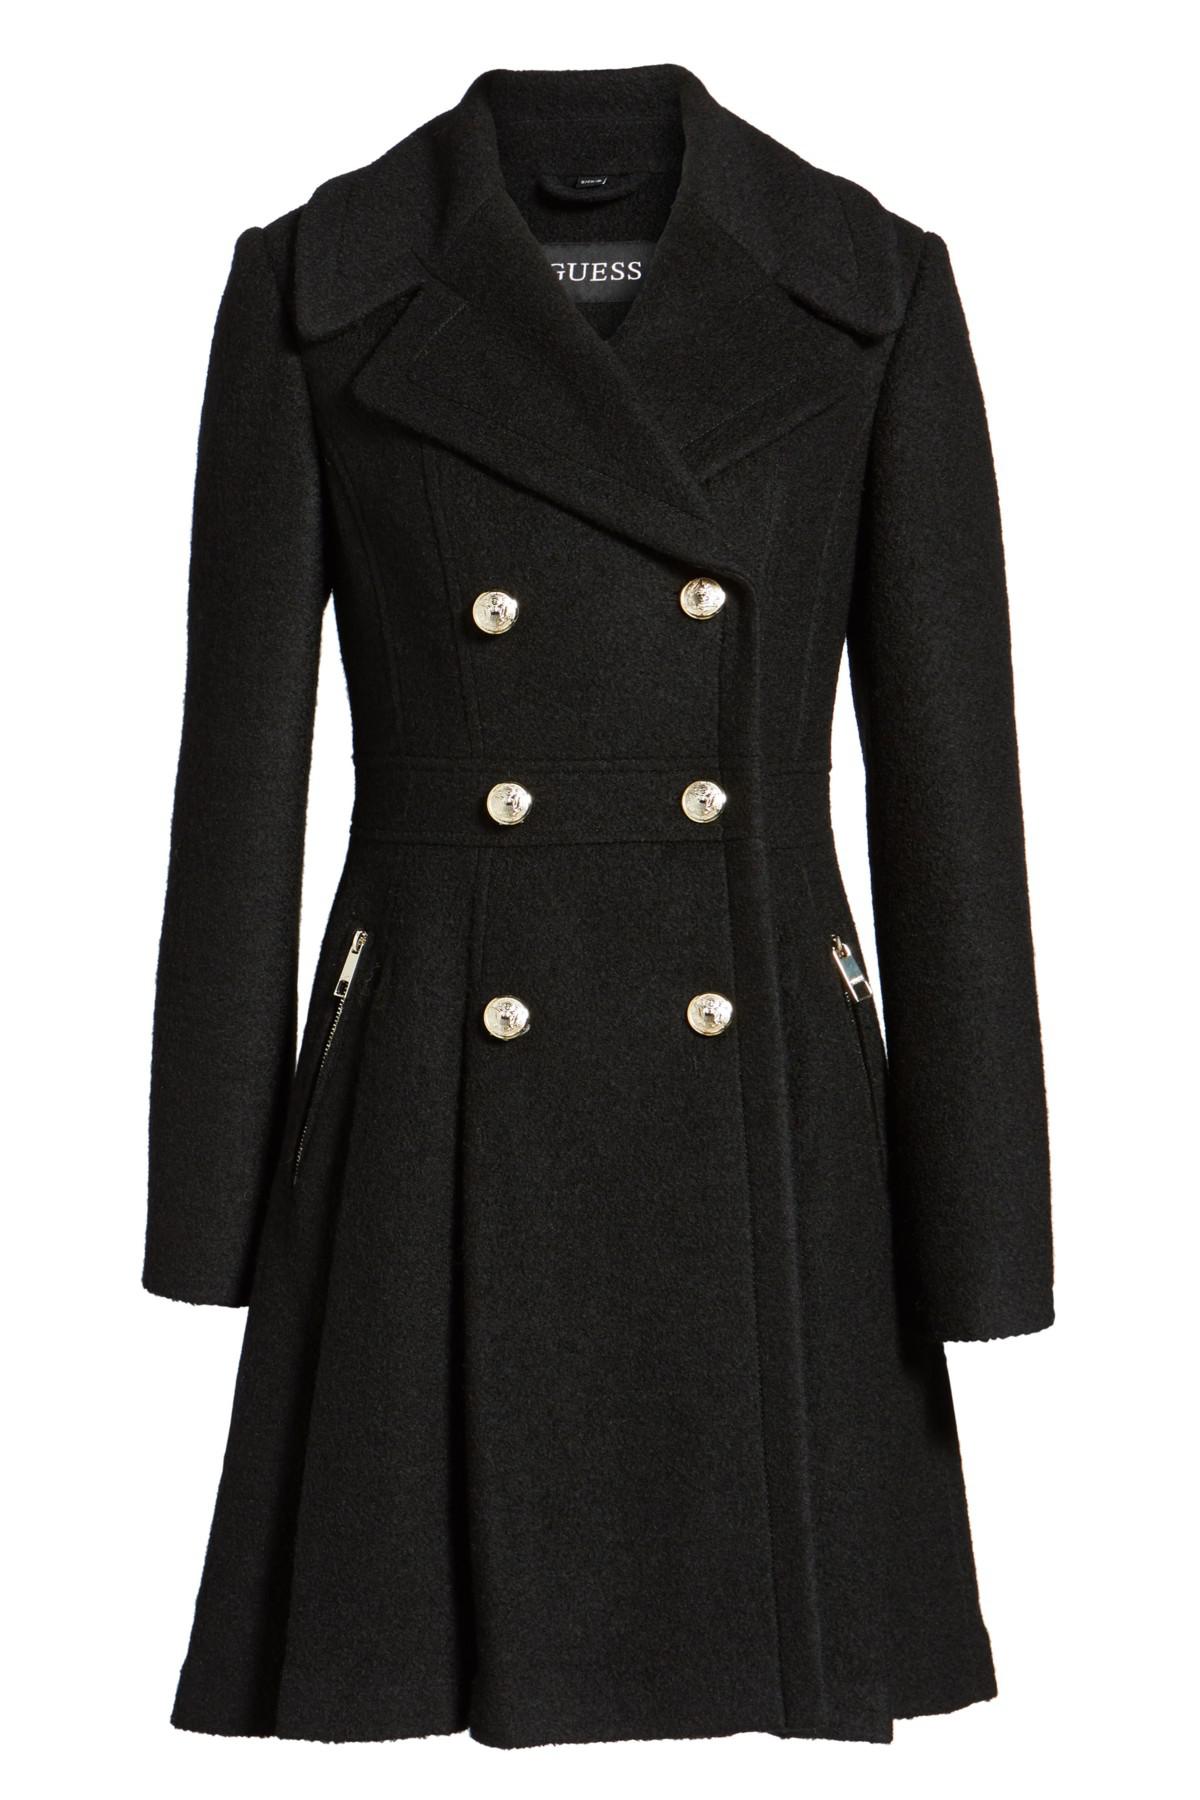 Guess Double Breasted Wool Blend Coat in Black - Lyst